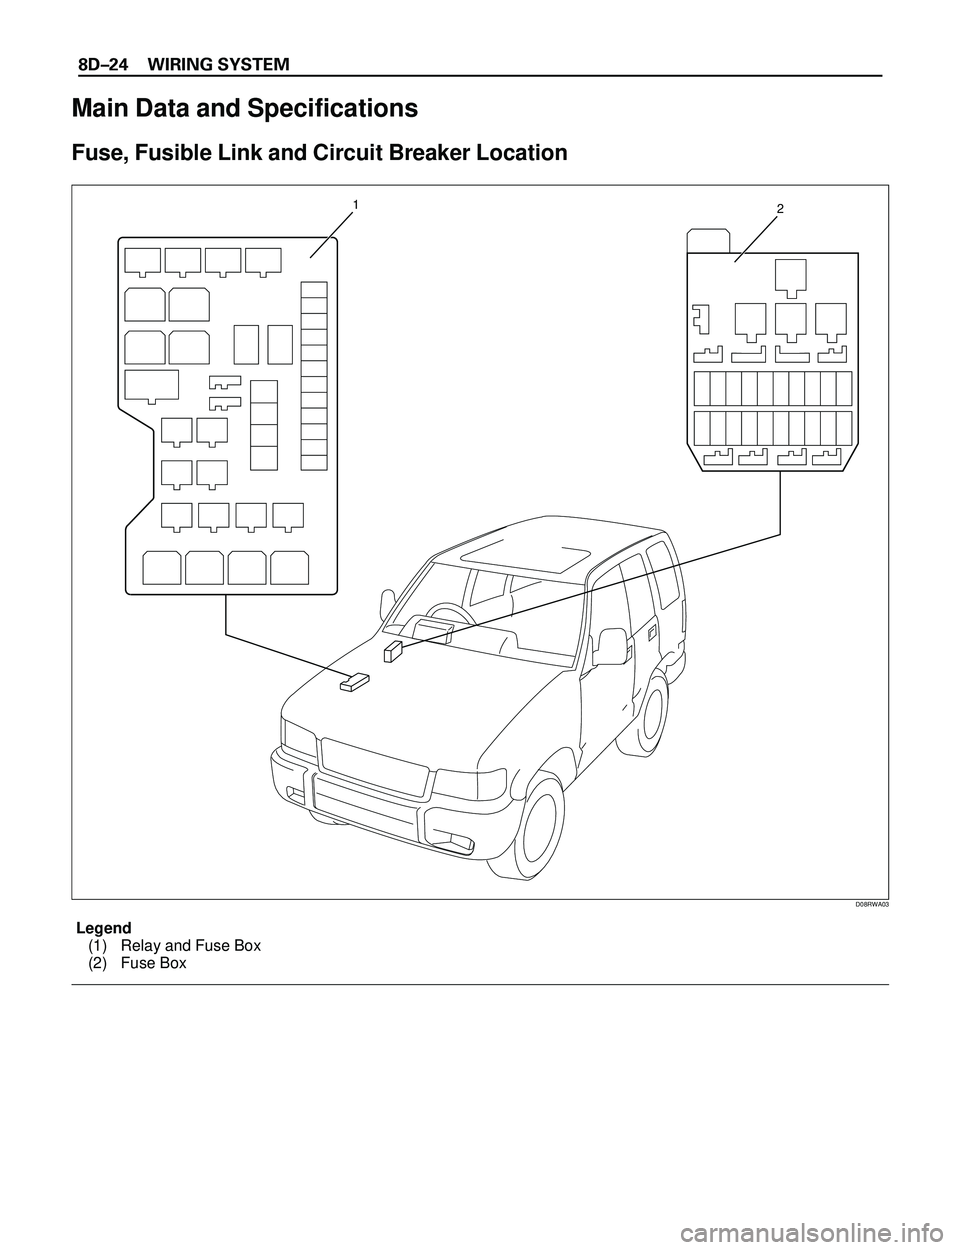 ISUZU TROOPER 1998  Service Repair Manual 8DÐ24 WIRING SYSTEM
12
D08RWA03
Legend
(1) Relay and Fuse Box
(2) Fuse Box
Main Data and Specifications
Fuse, Fusible Link and Circuit Breaker Location 